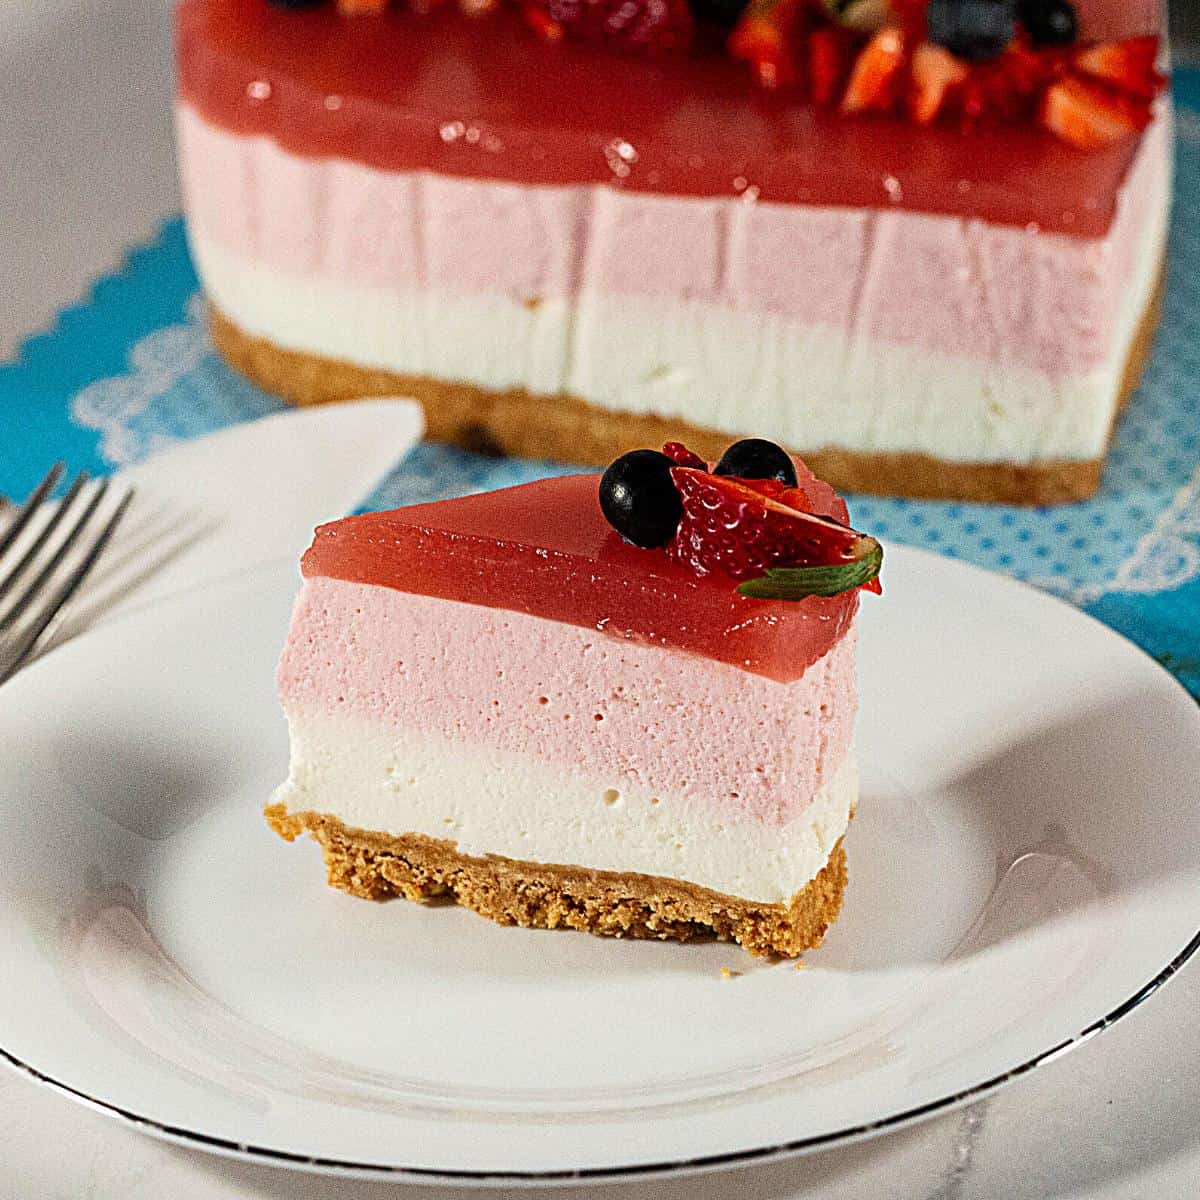 A slice of cream cheese mousse cake.